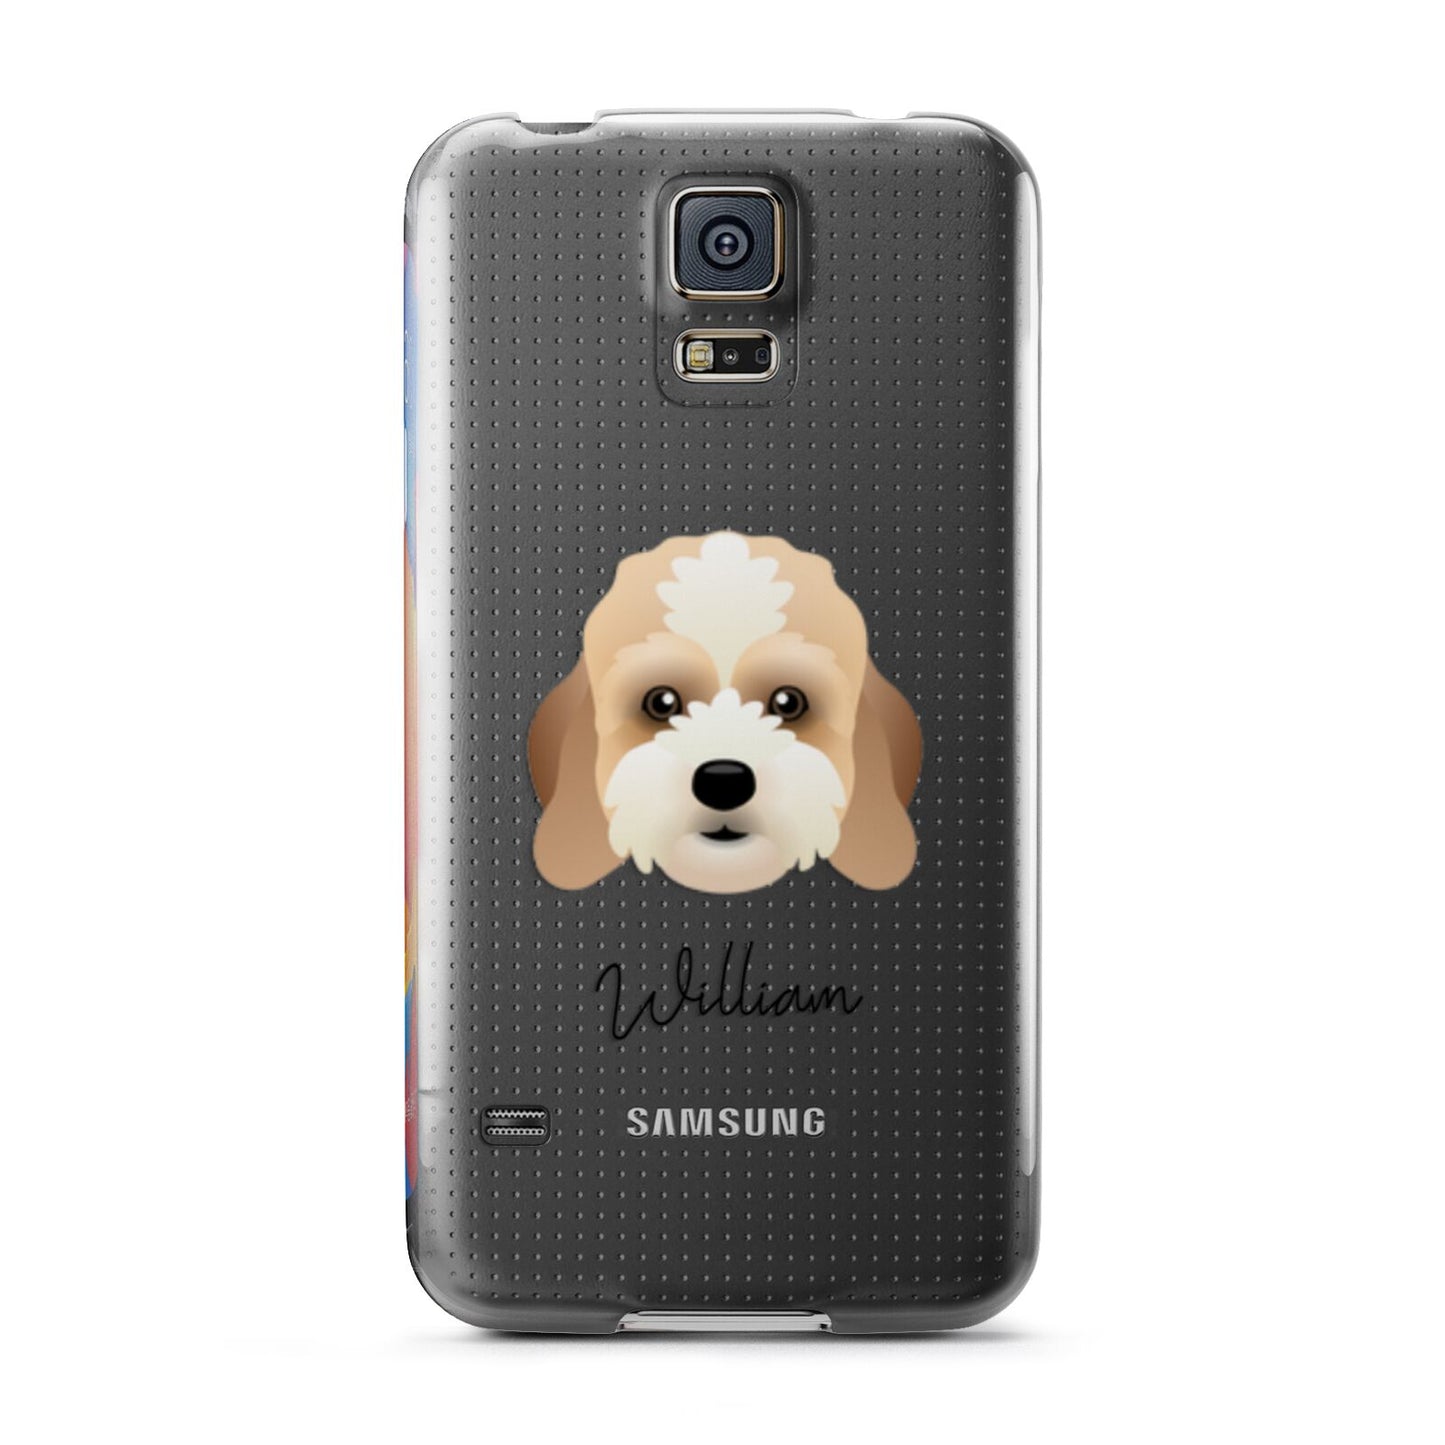 Lhasapoo Personalised Samsung Galaxy S5 Case